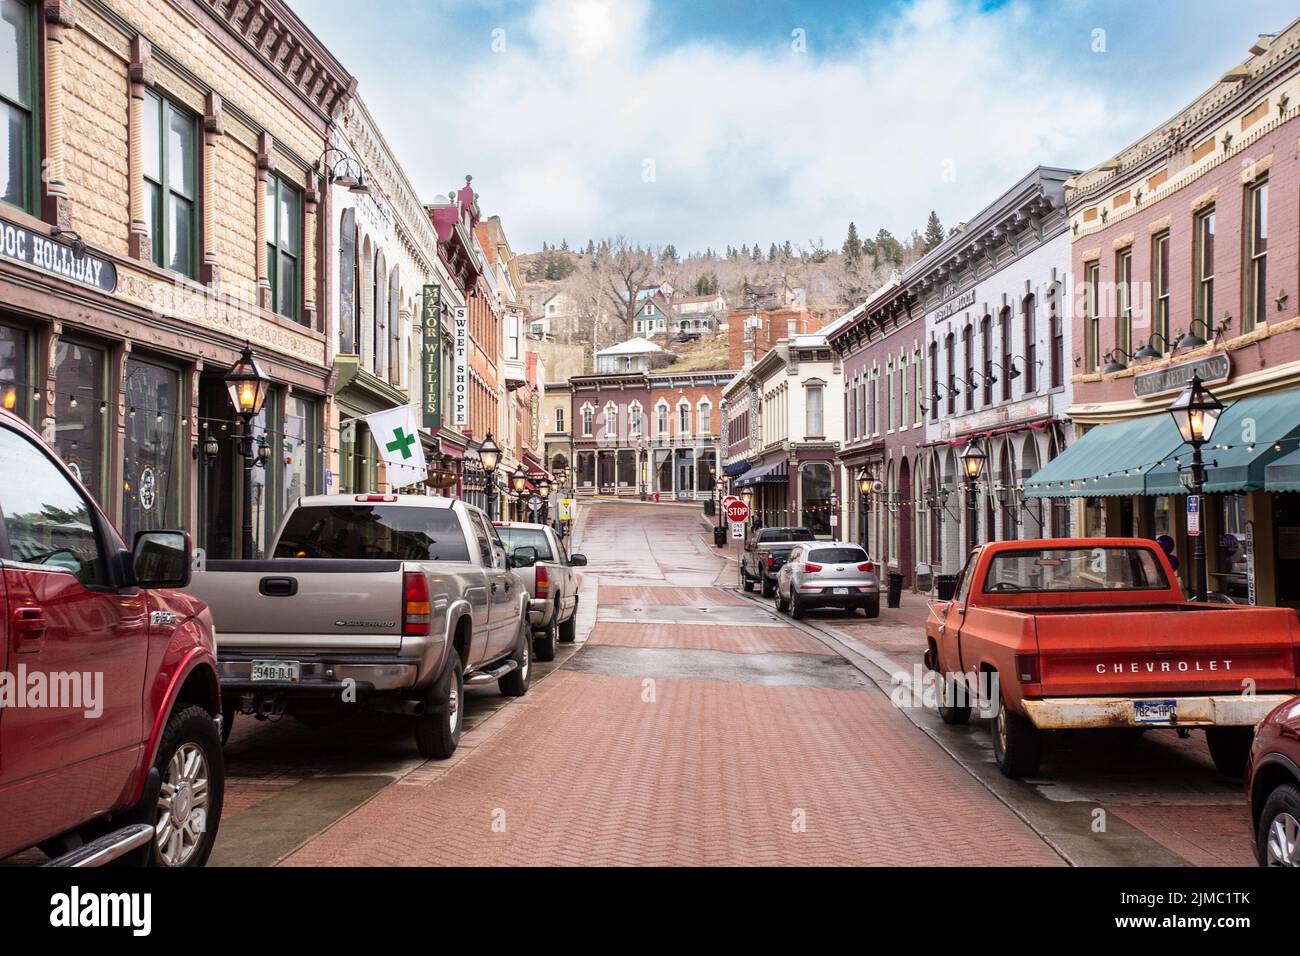 Central City, Colorado - May 1, 2018:  View of historic western city of downtown Central City Colorado Stock Photo